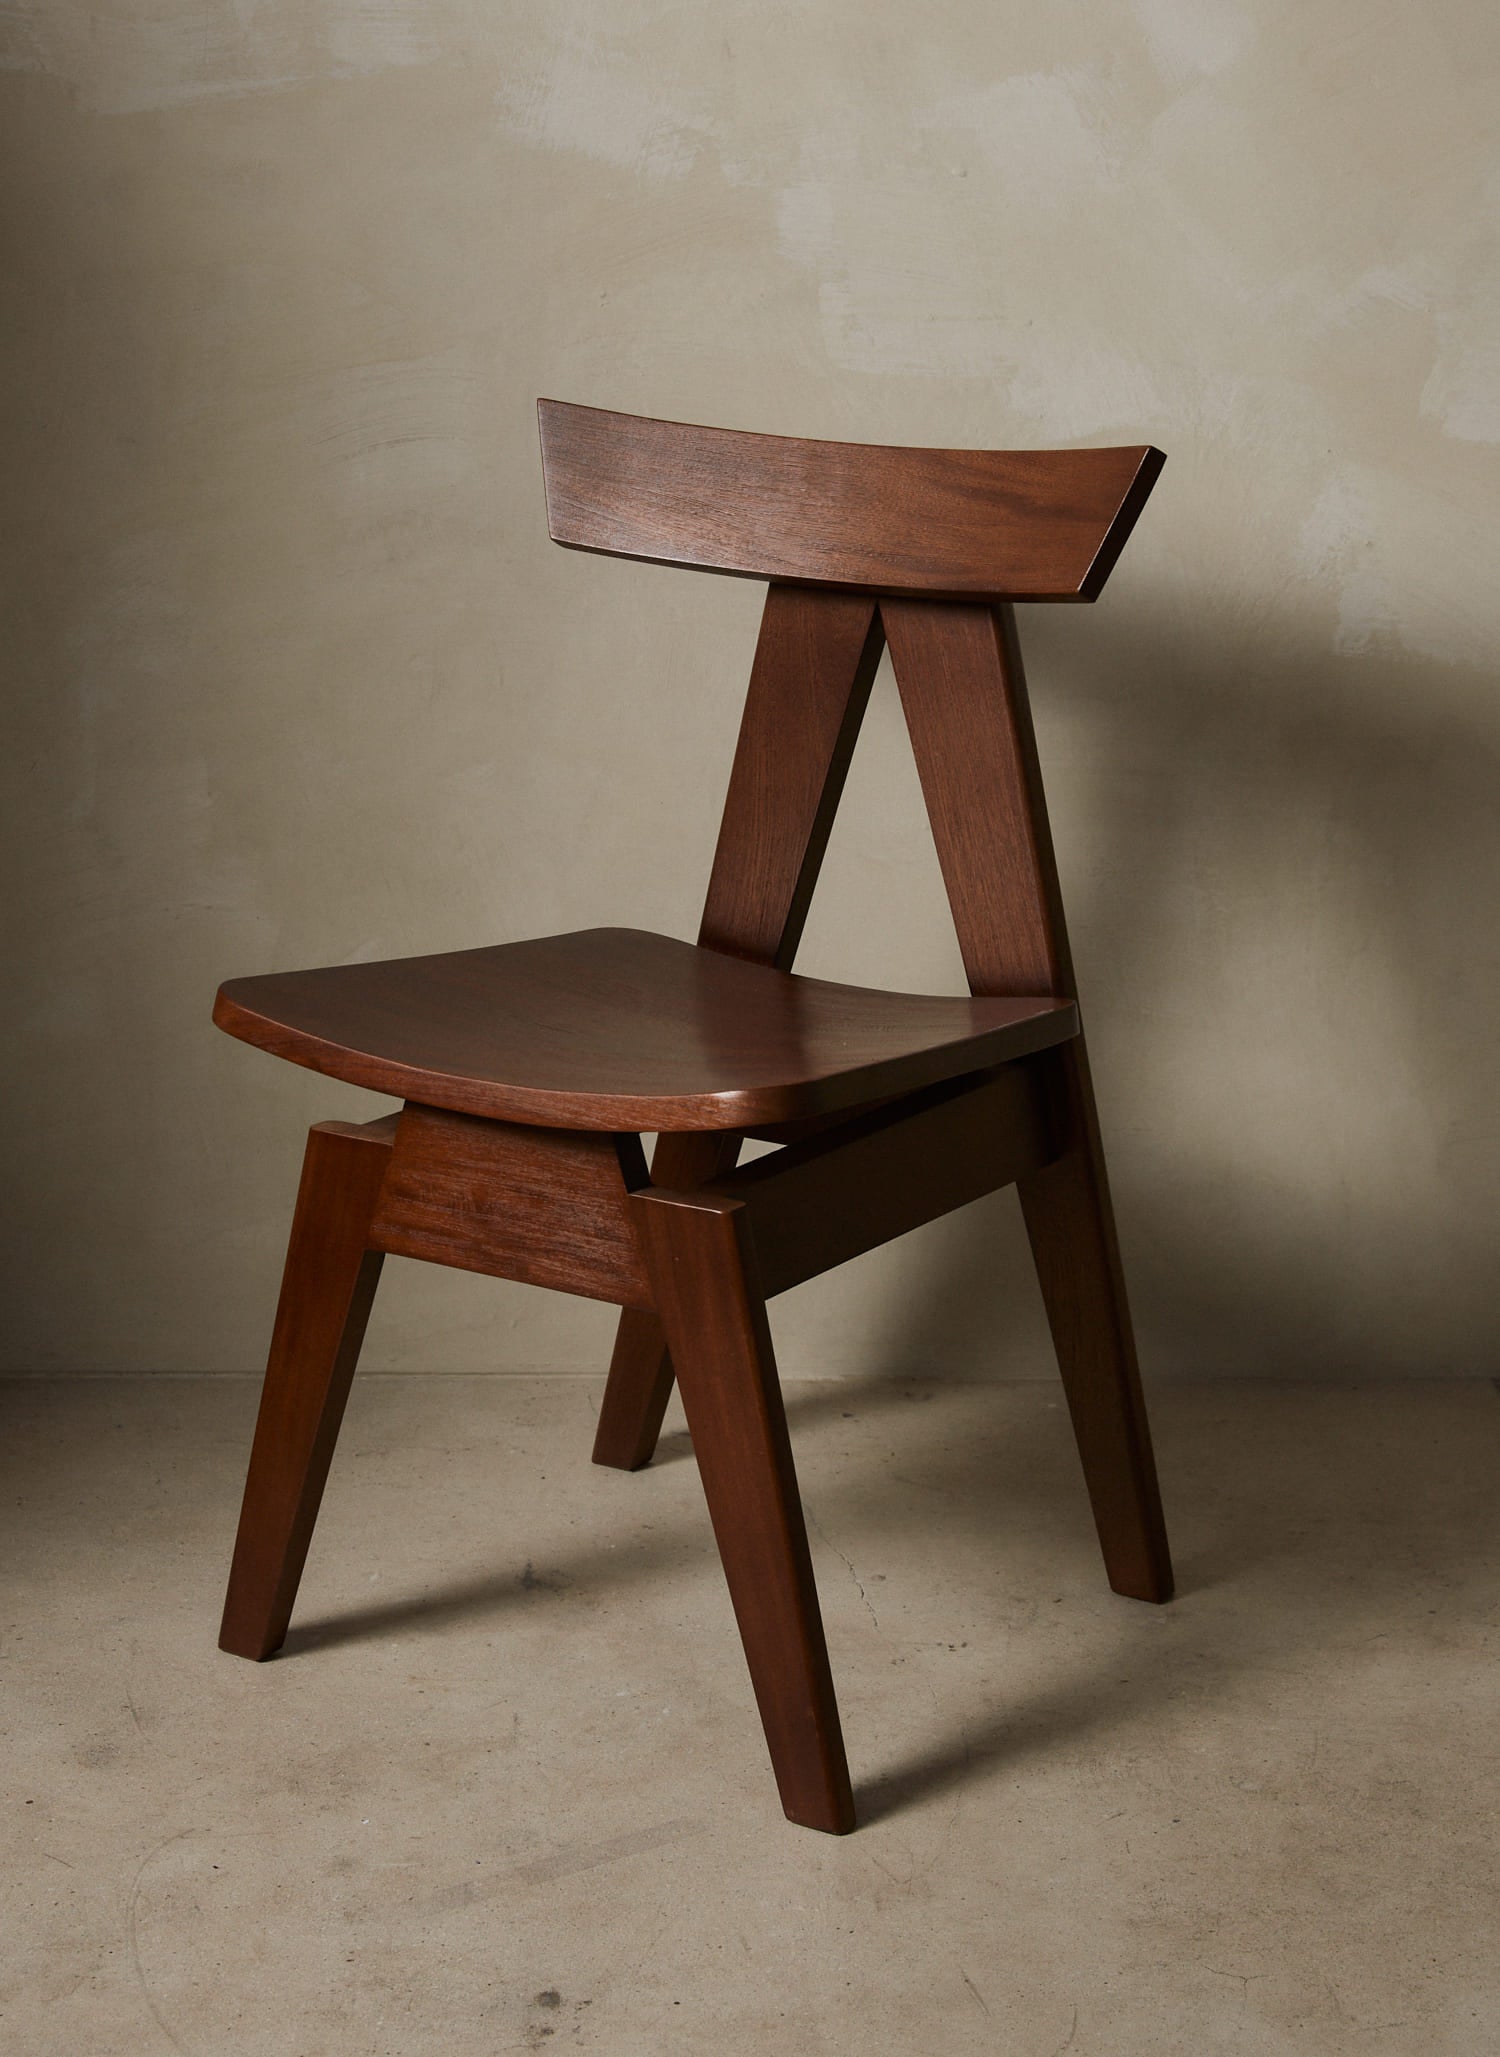  Clean, modernist dining chair with sharp angles sculpted from solid wood in a rich, deep brown finish.